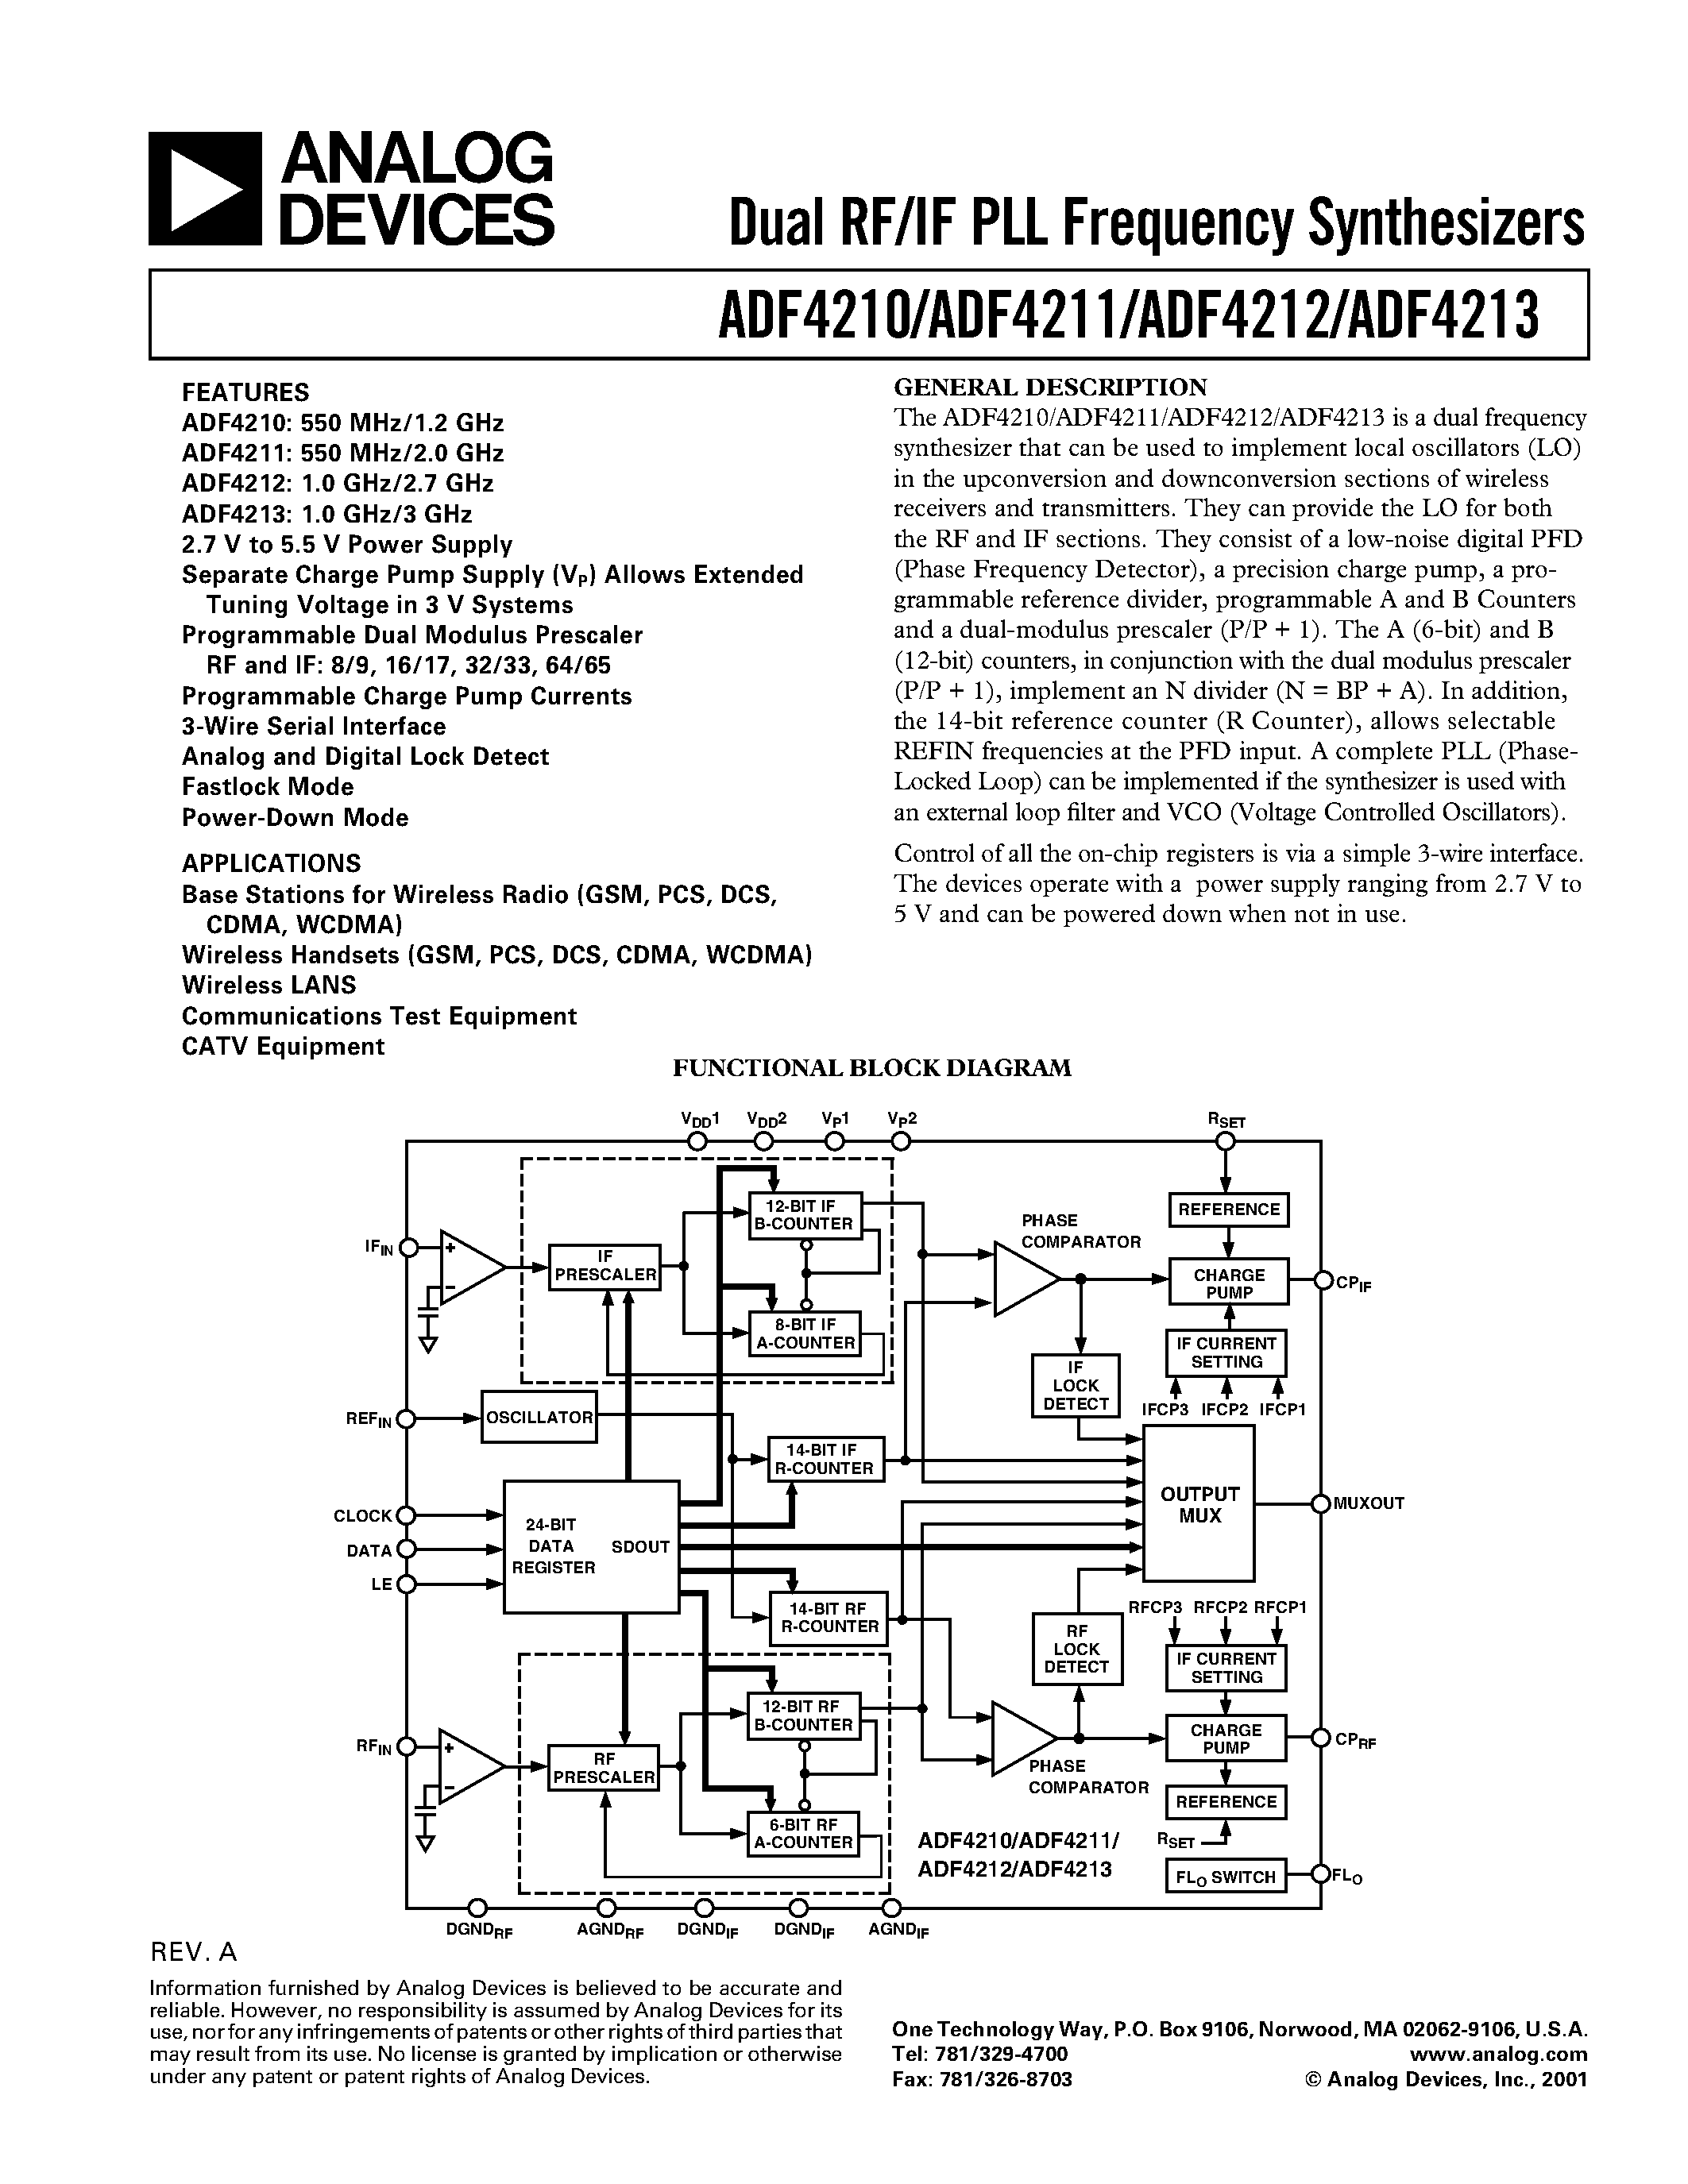 Даташит ADF4210 - Dual RF/IF PLL Frequency Synthesizers страница 1